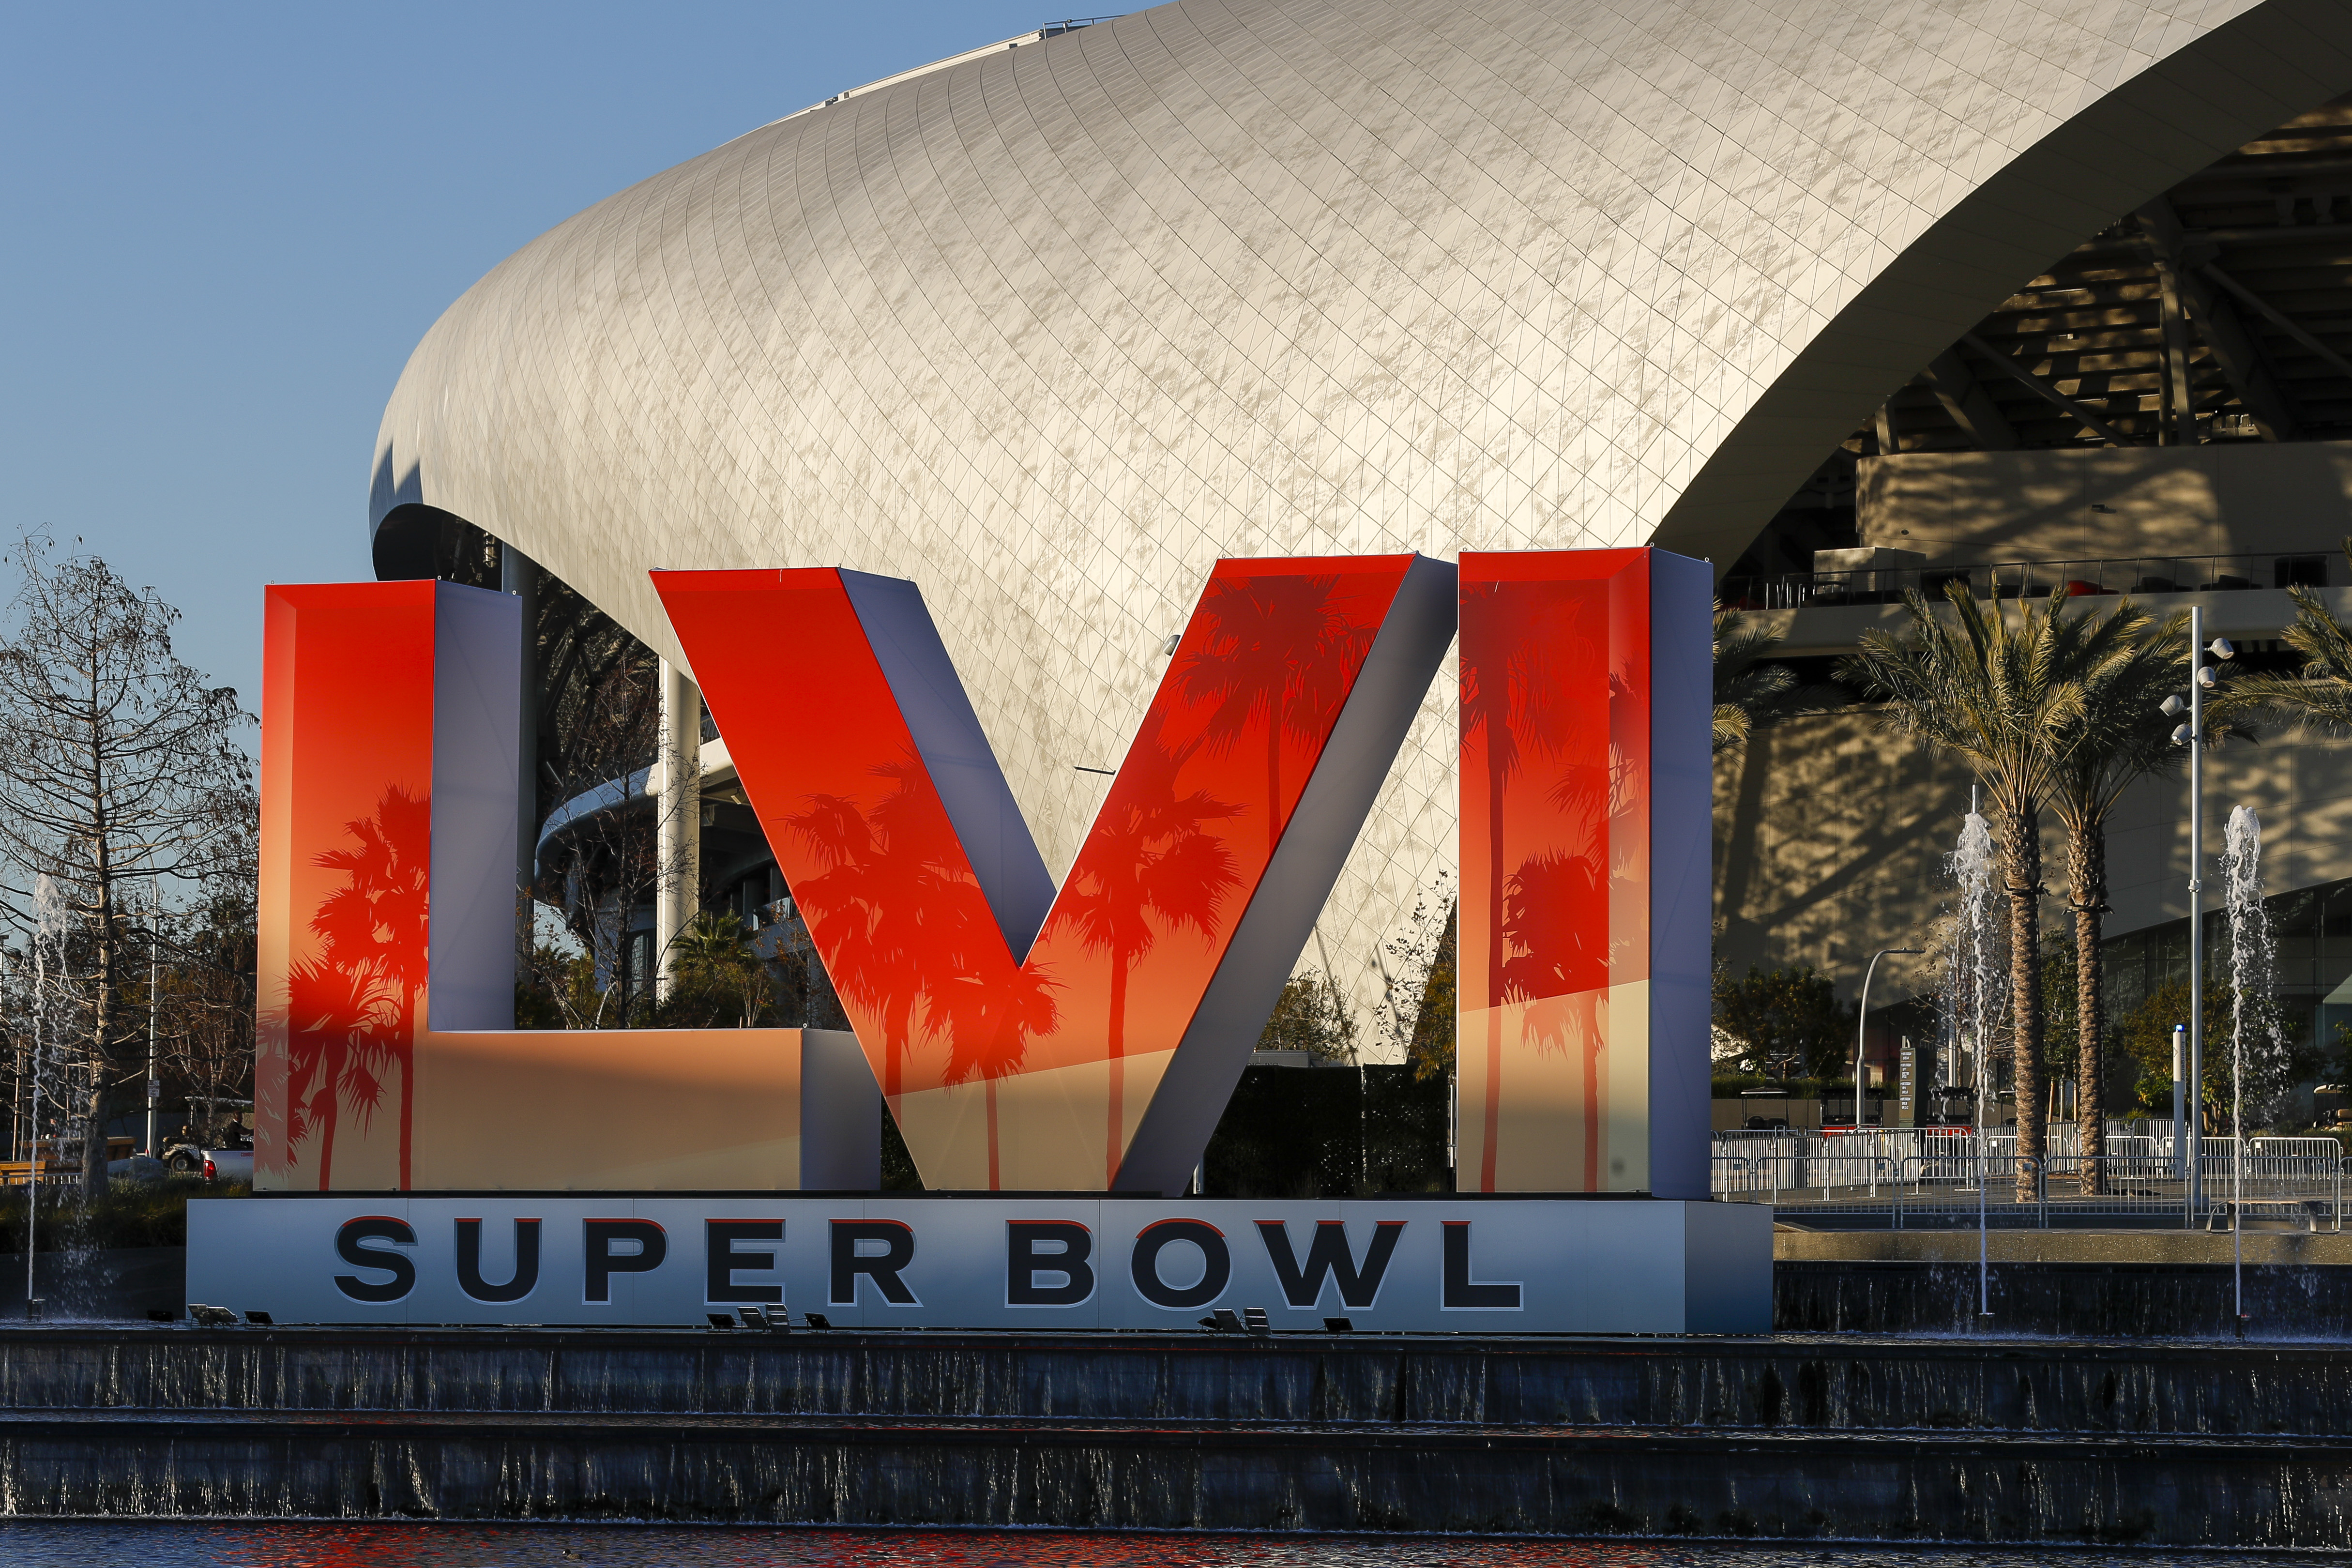 Super Bowl 2022 Heres How to Watch on TV and Stream Online